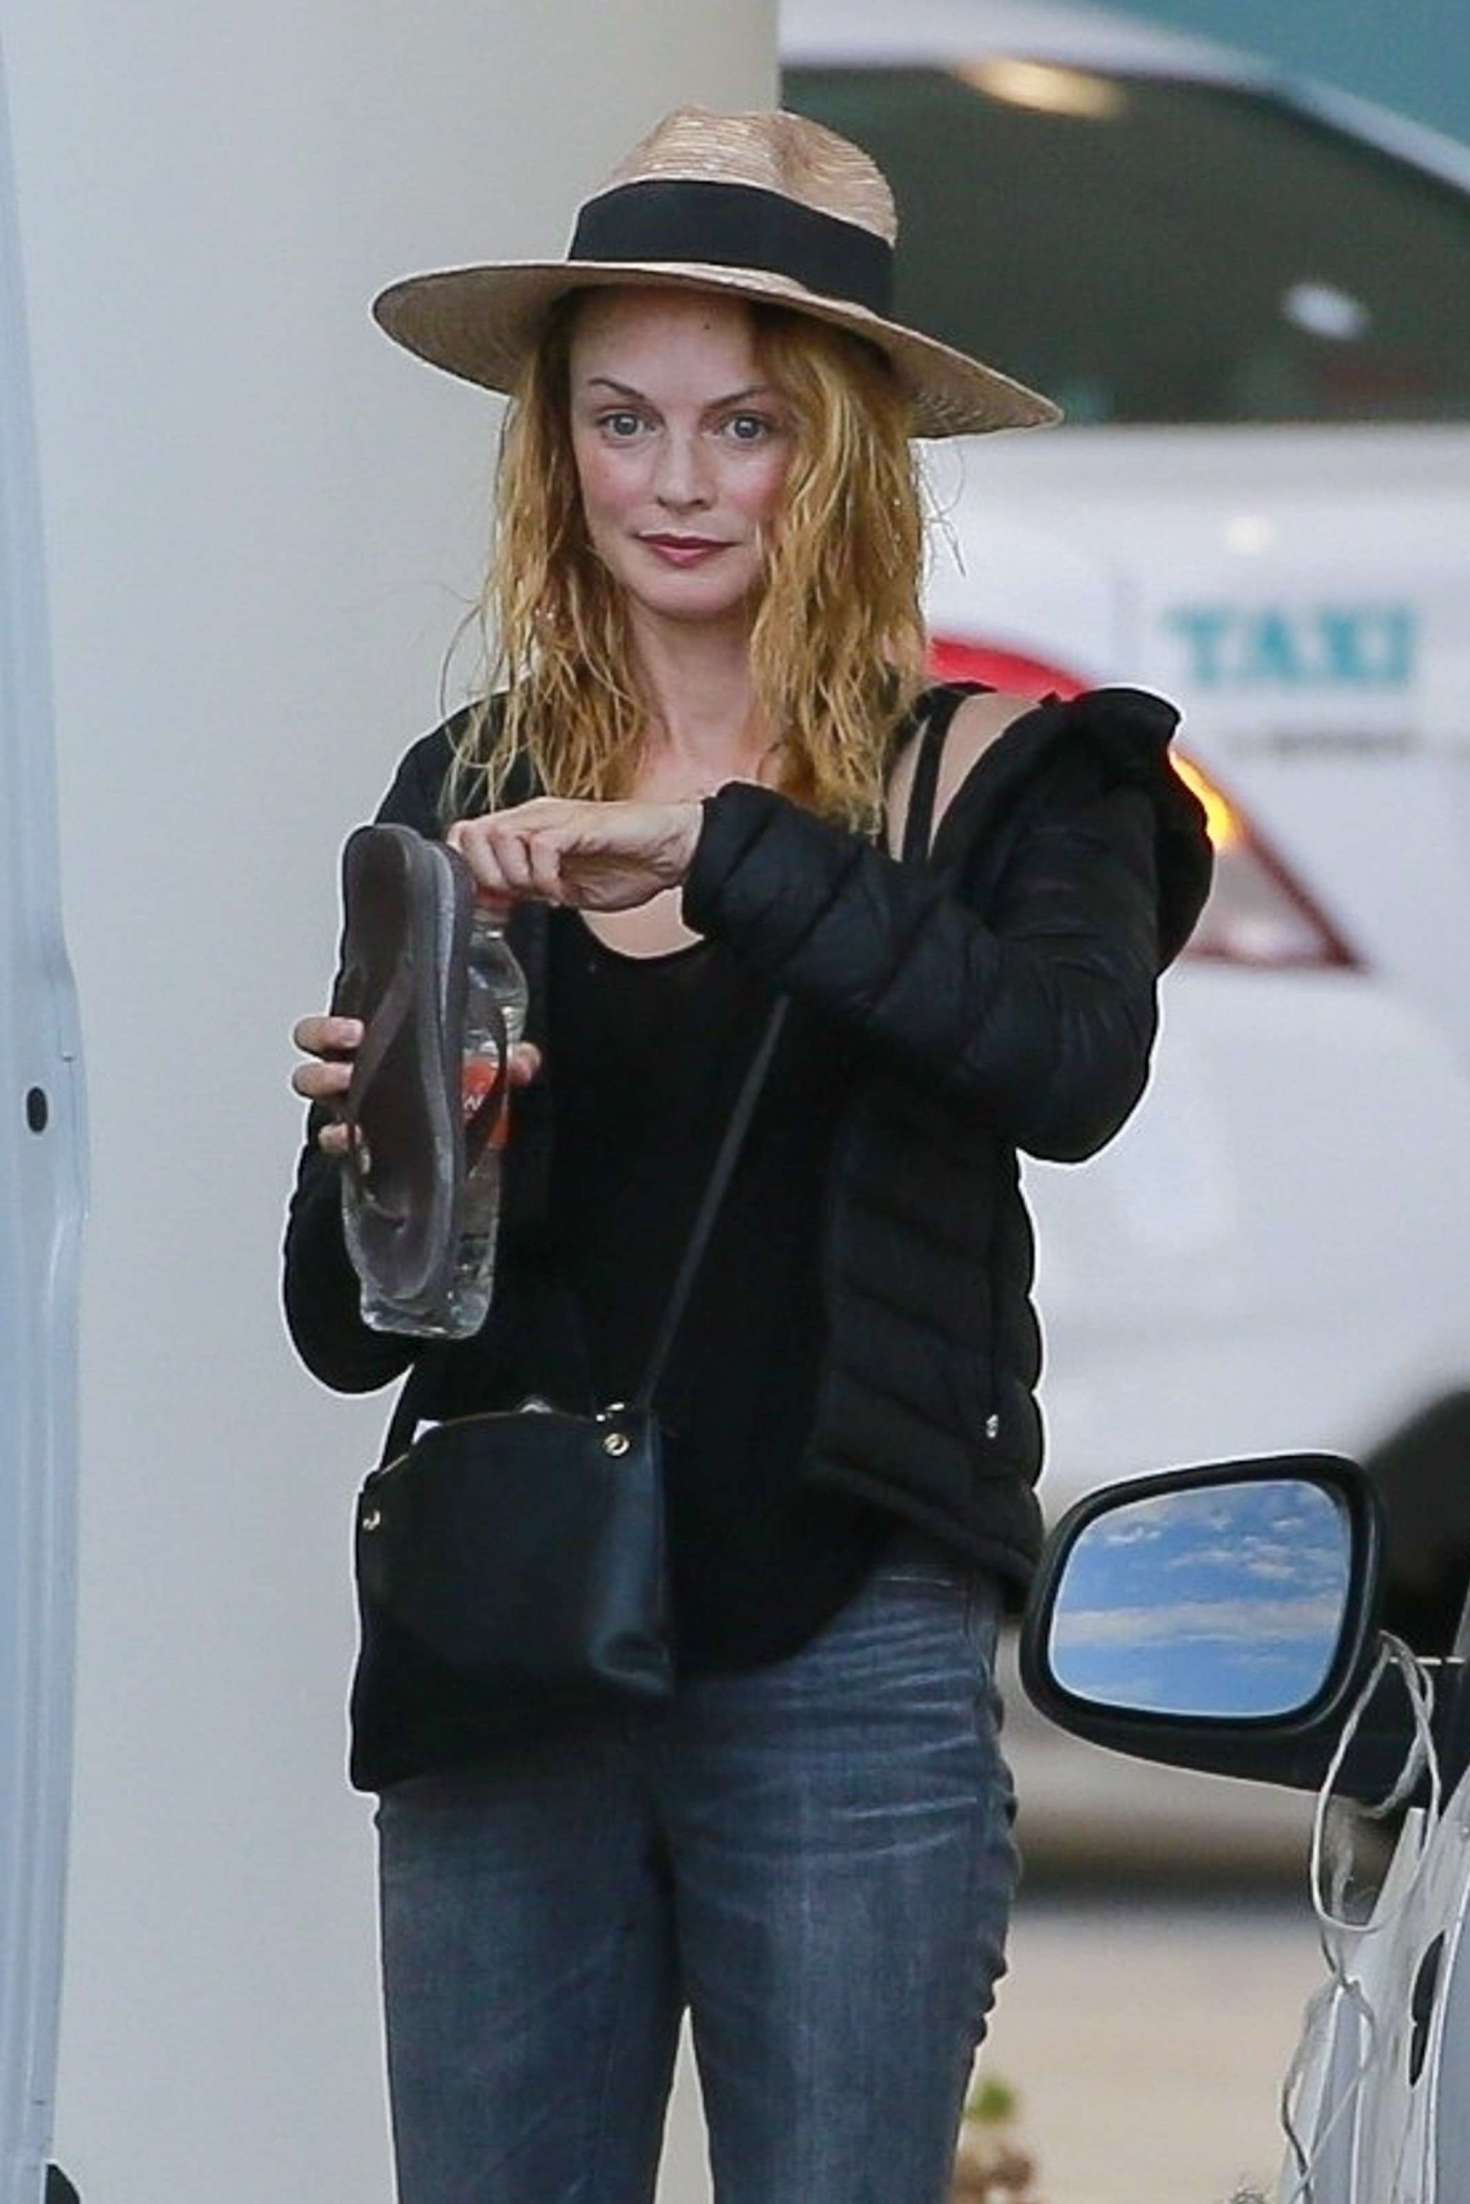 Heather Graham - Arrives at Cancun International Airport in Mexico